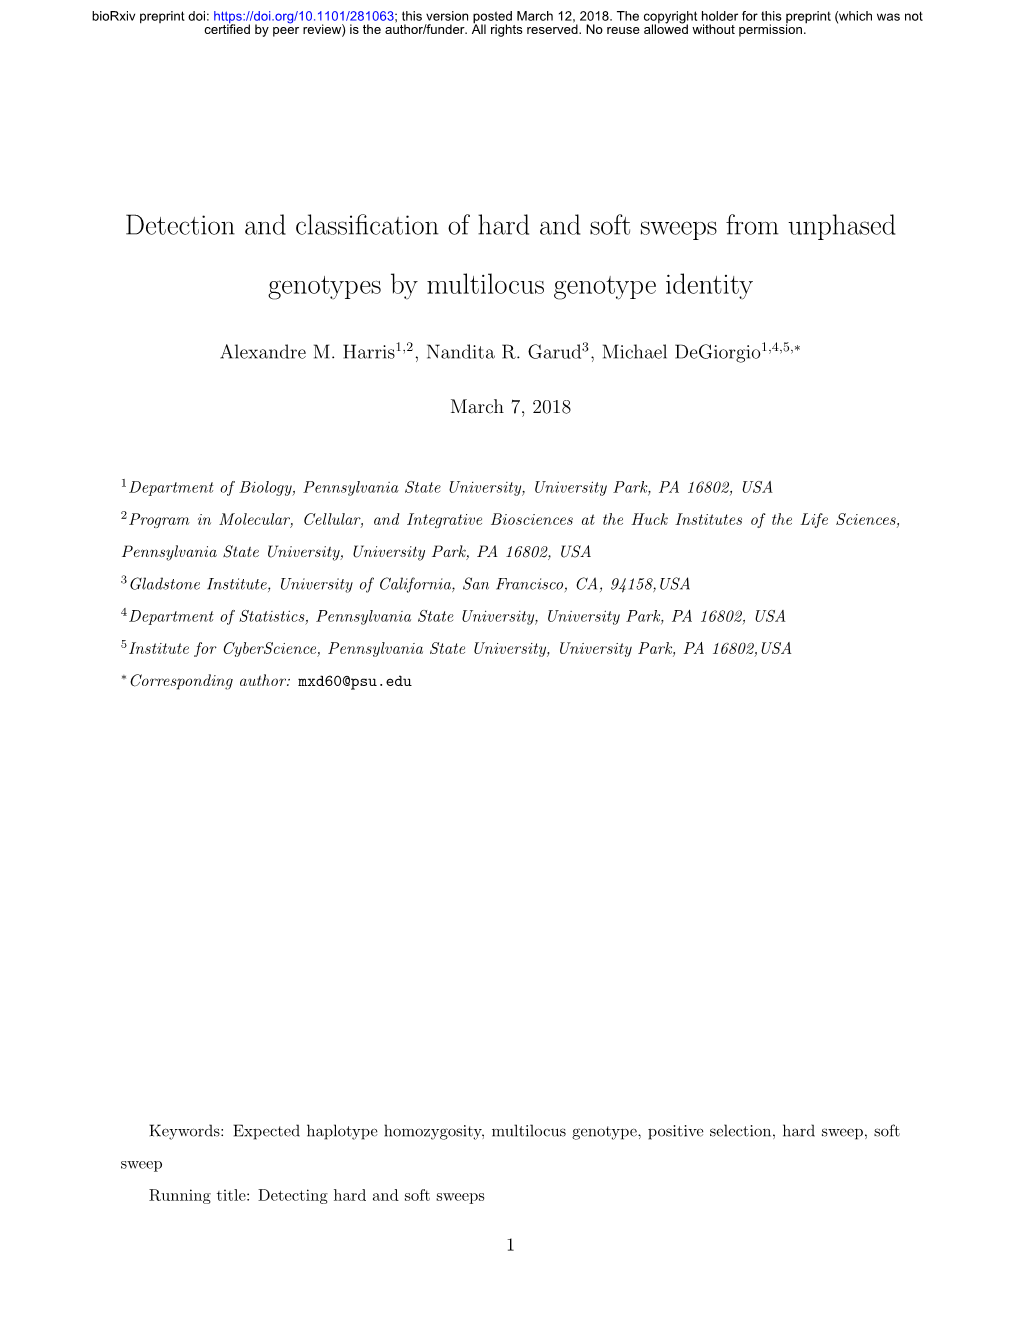 Detection and Classification of Hard and Soft Sweeps From